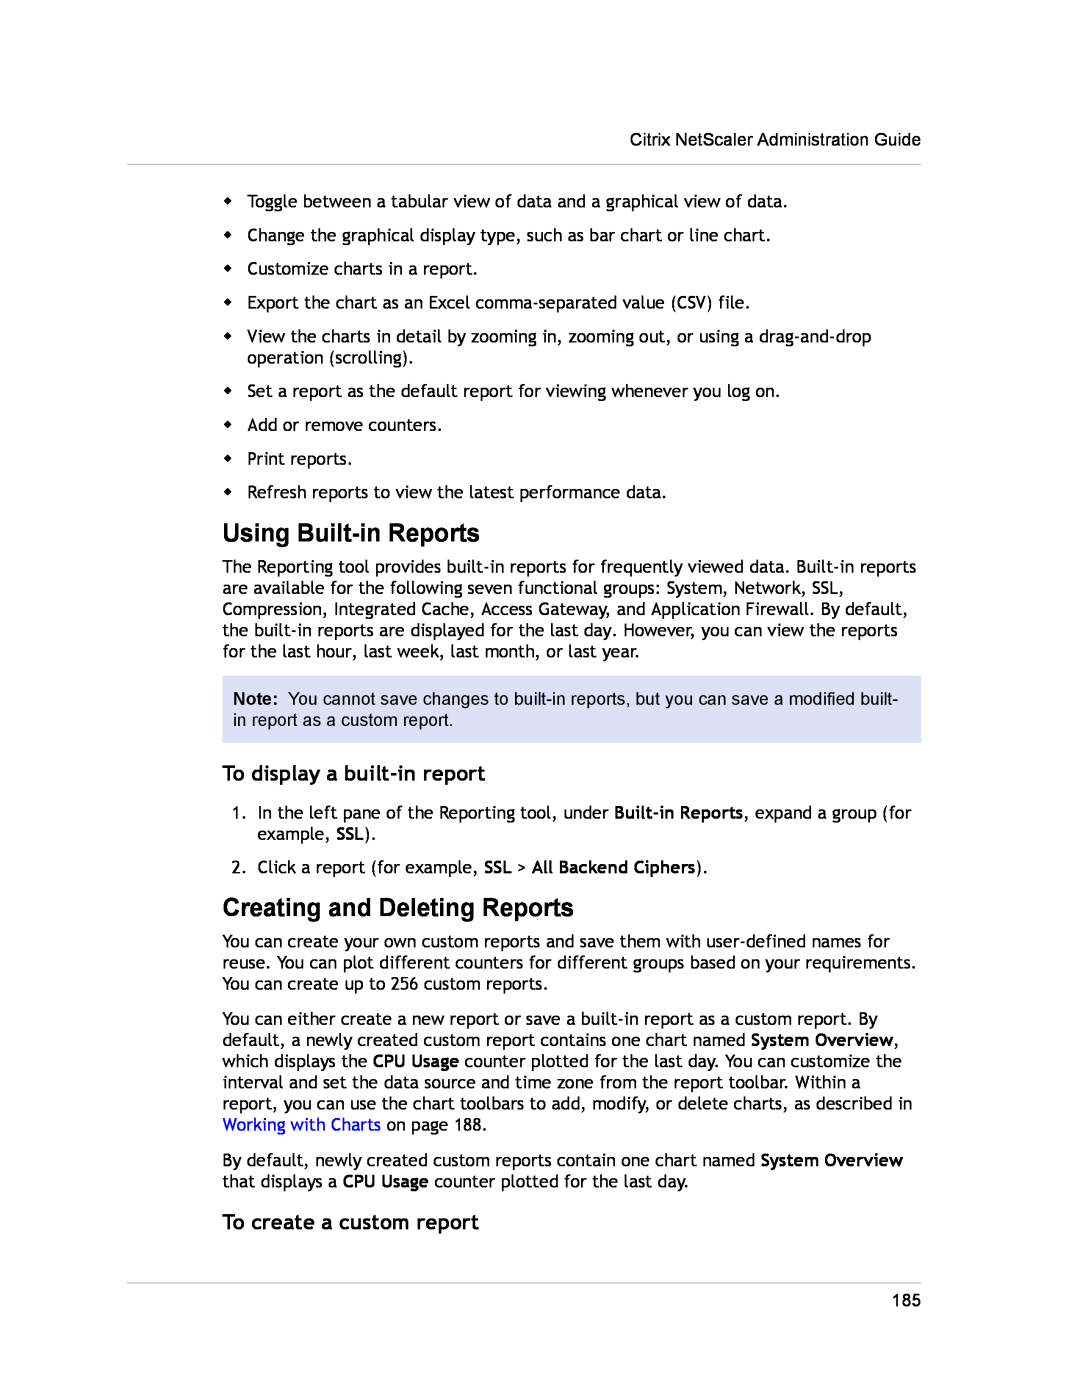 Citrix Systems CITRIX NETSCALER 9.3 Using Built-in Reports, Creating and Deleting Reports, To display a built-in report 